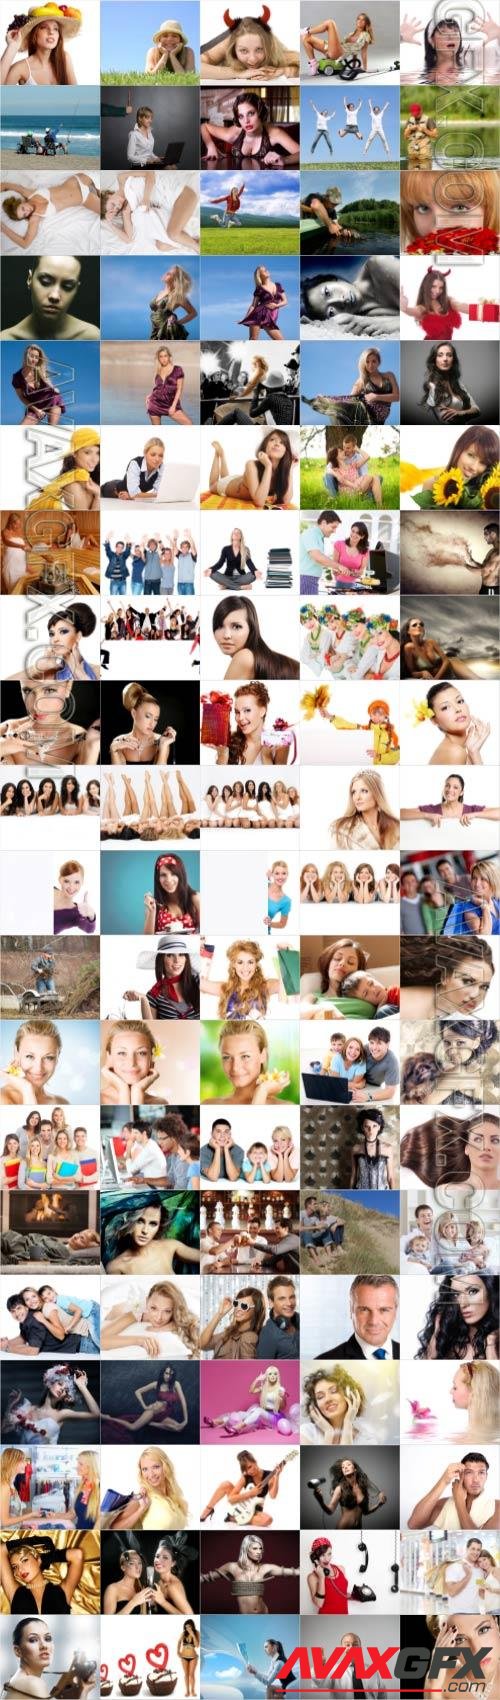 People large selection stock photos